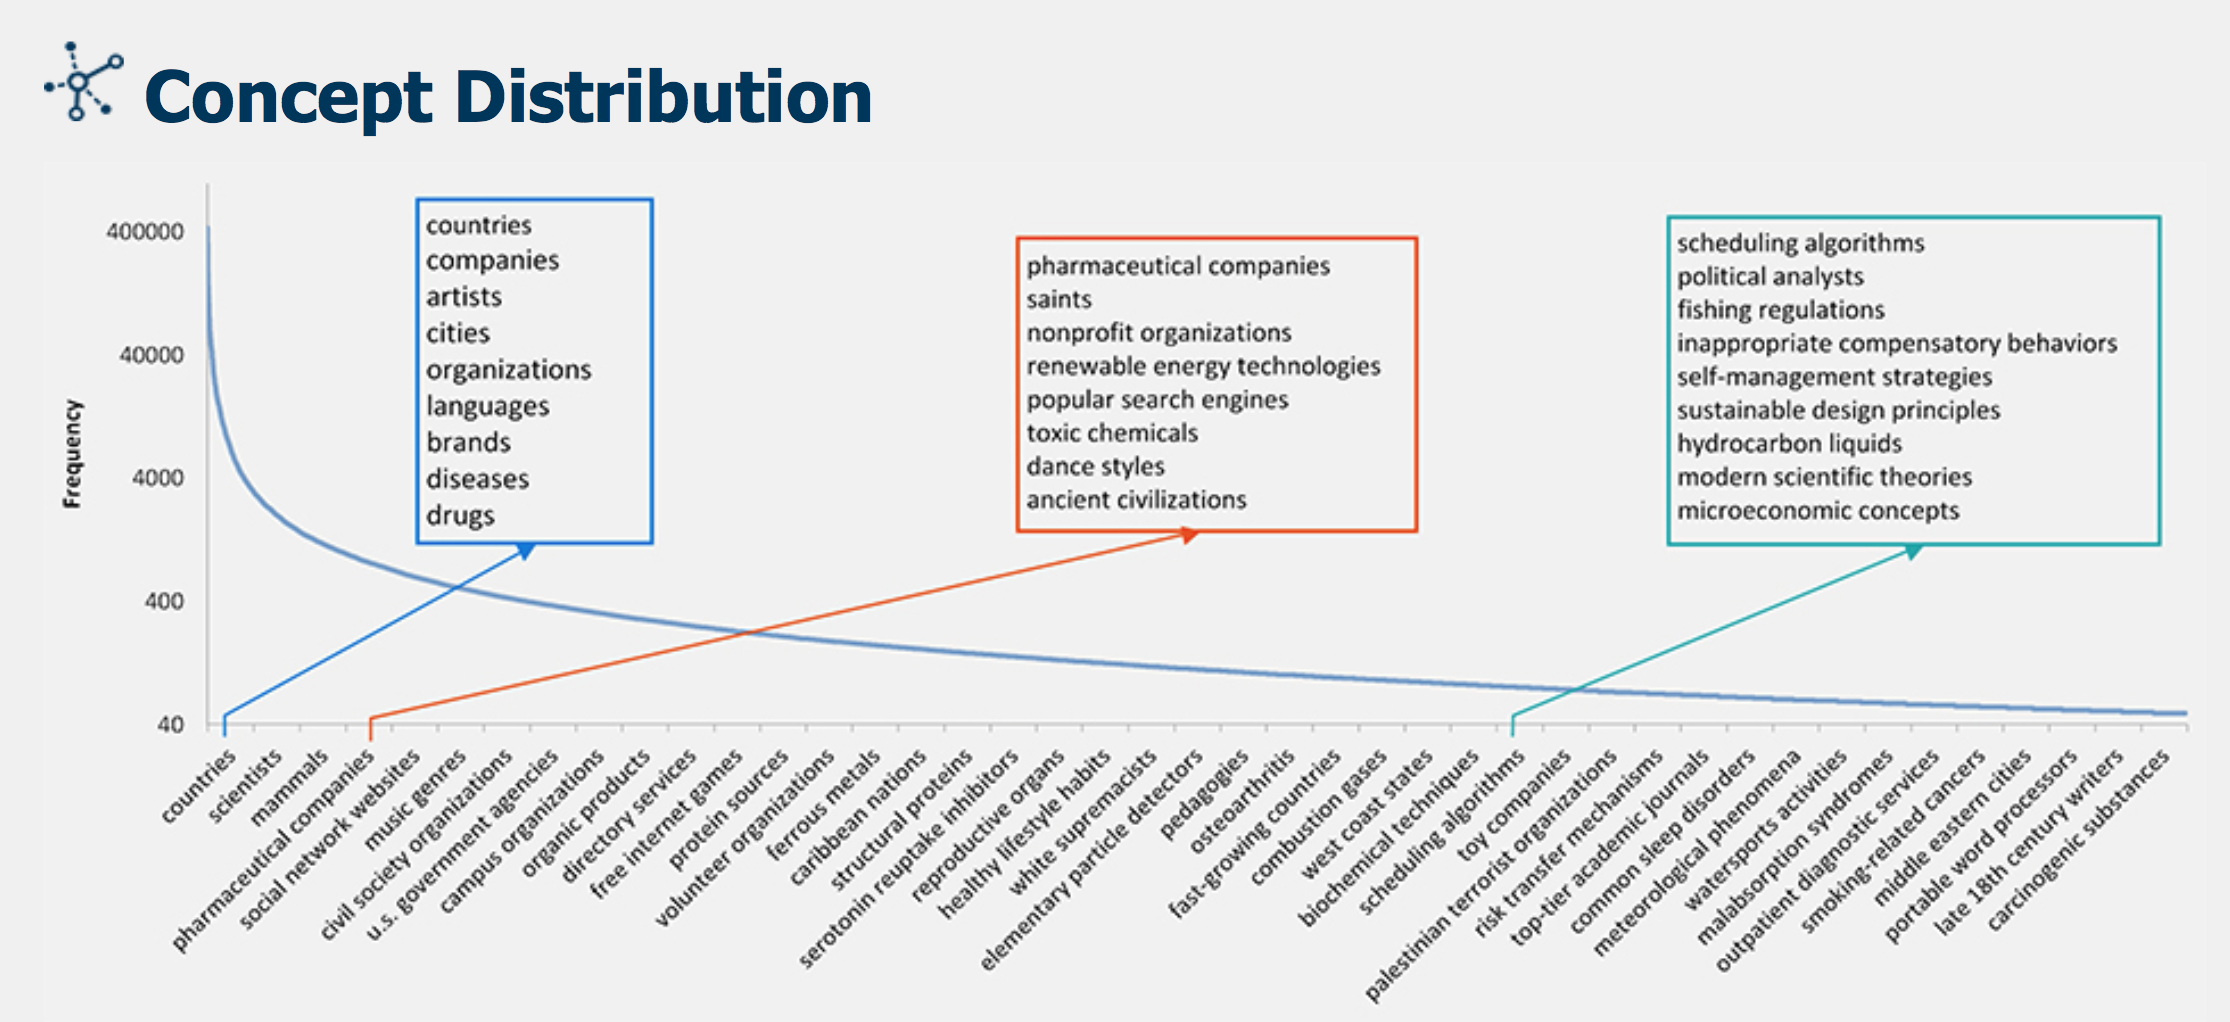 Microsoft Research's distribution of concepts in the Concept Graph.